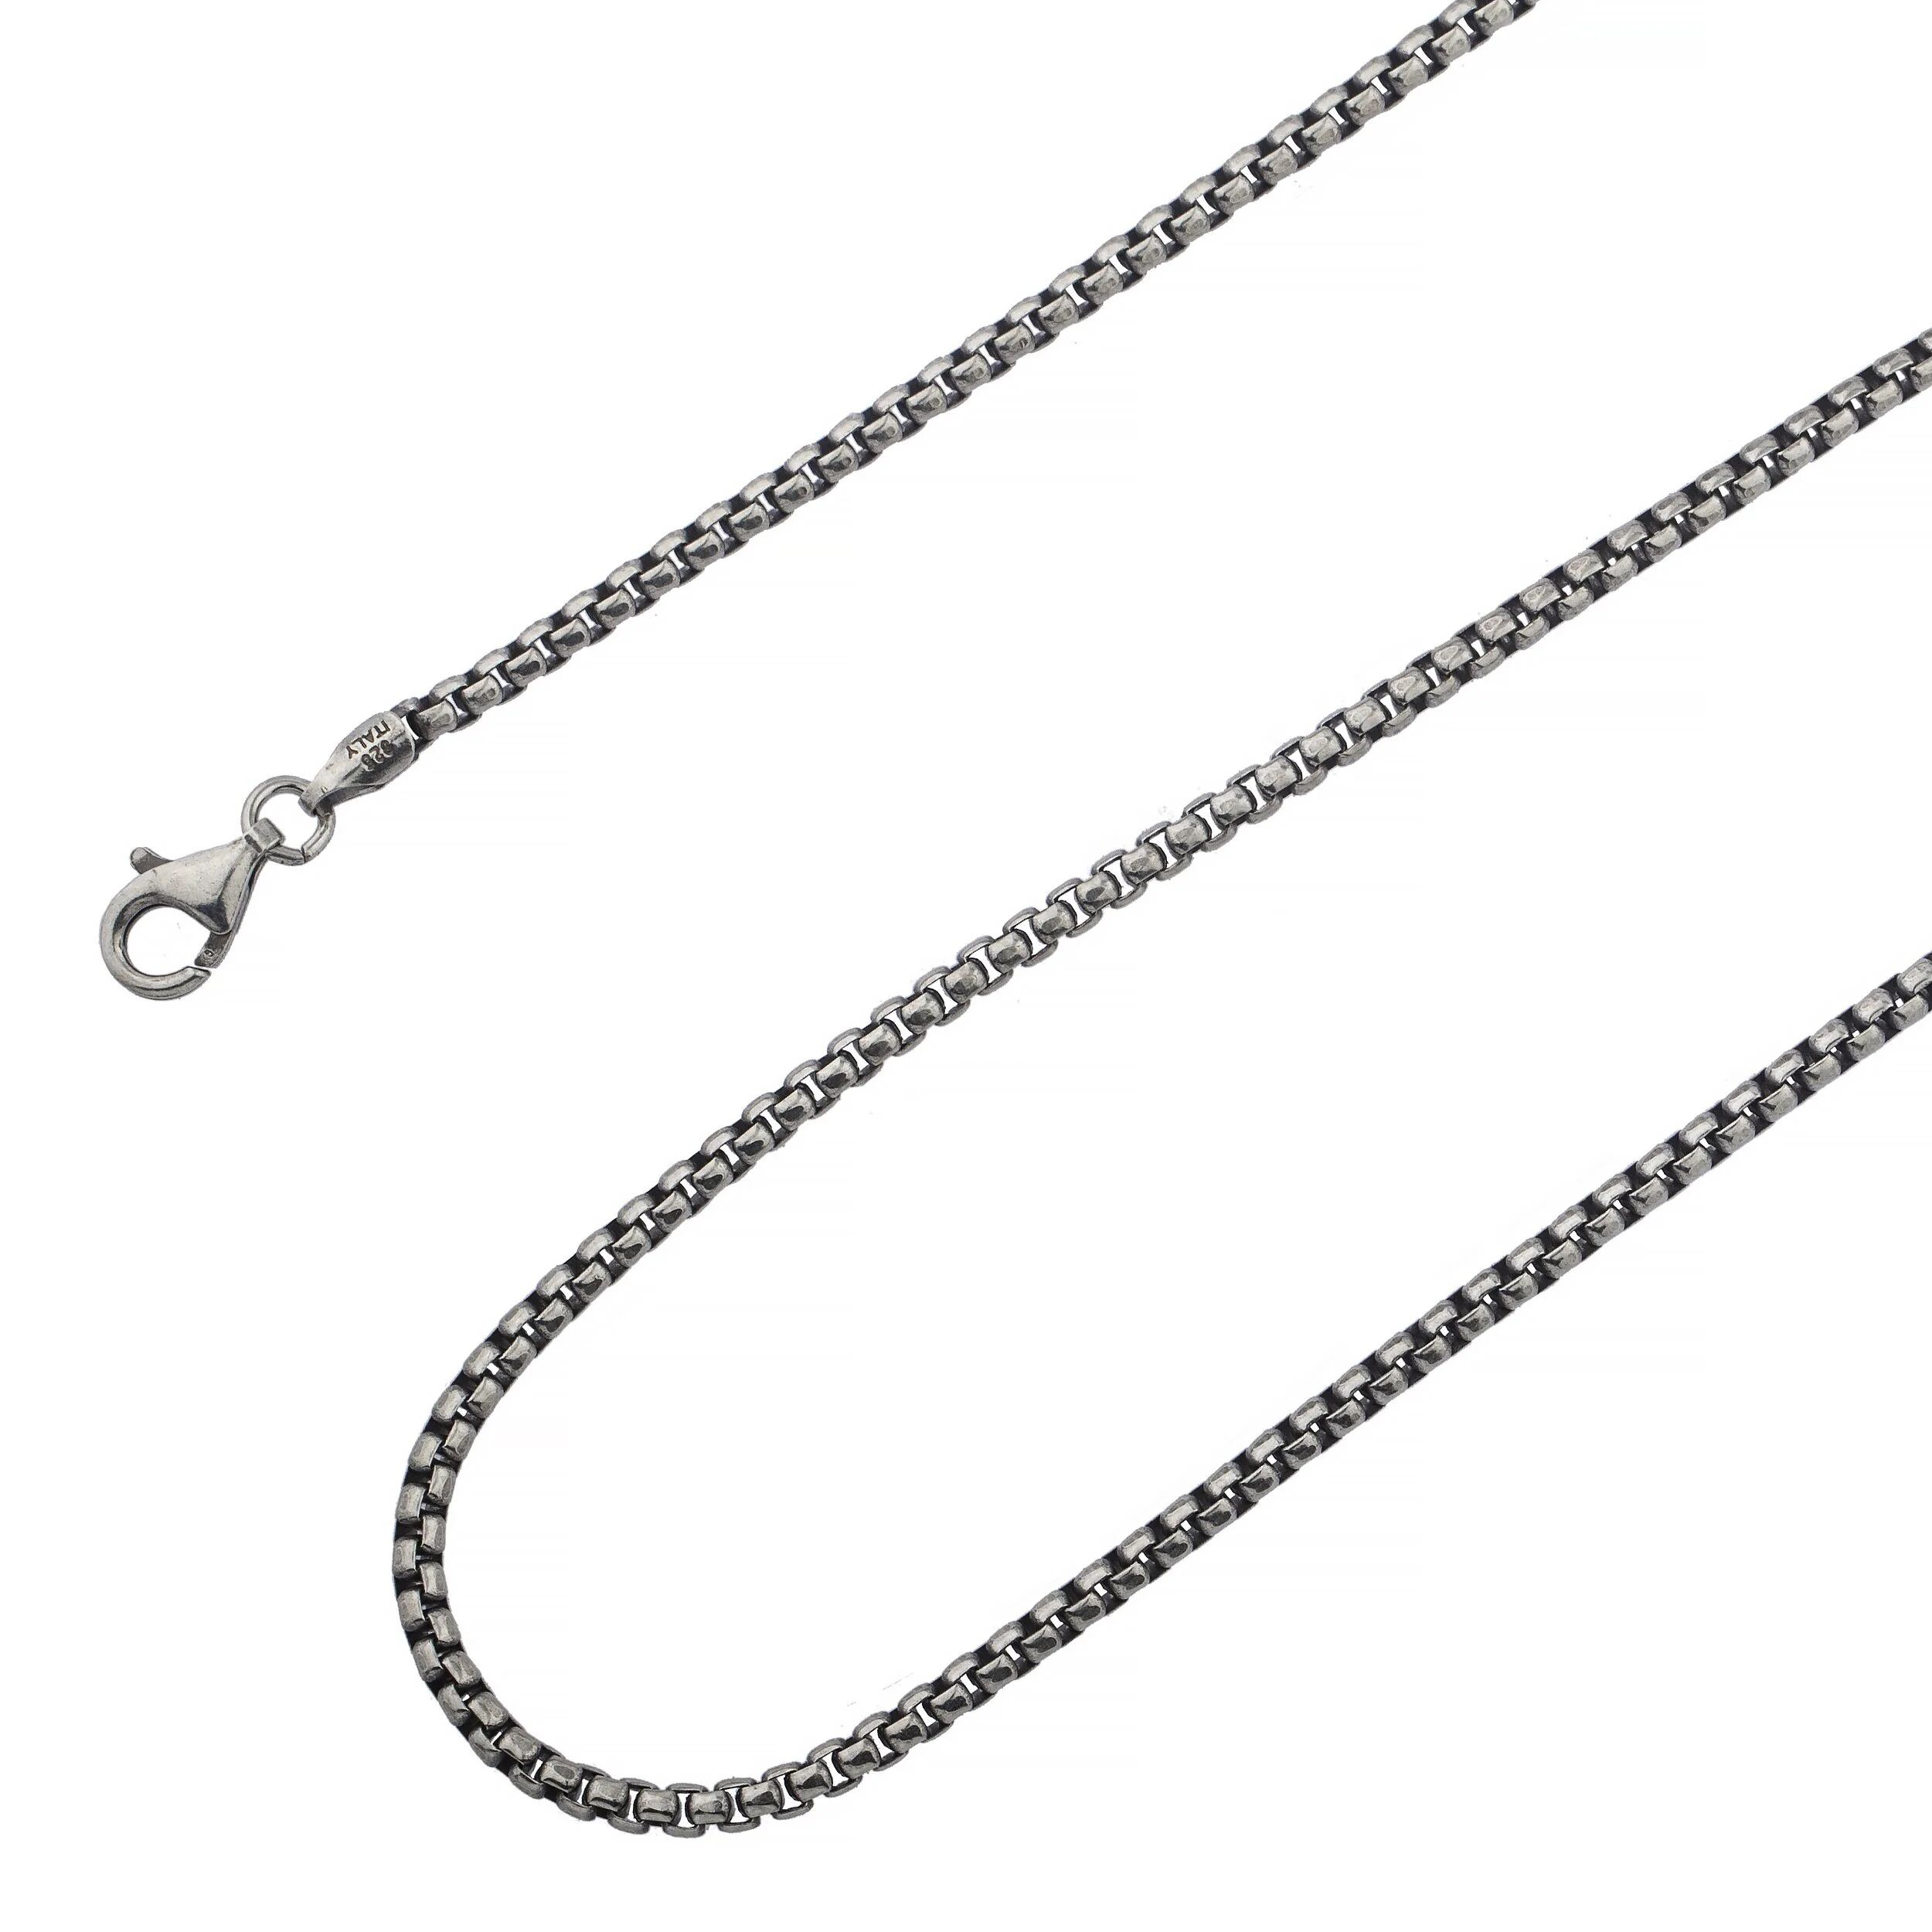 DailySale Solid Round Box Chain Necklace - Oxidized Antique Finish